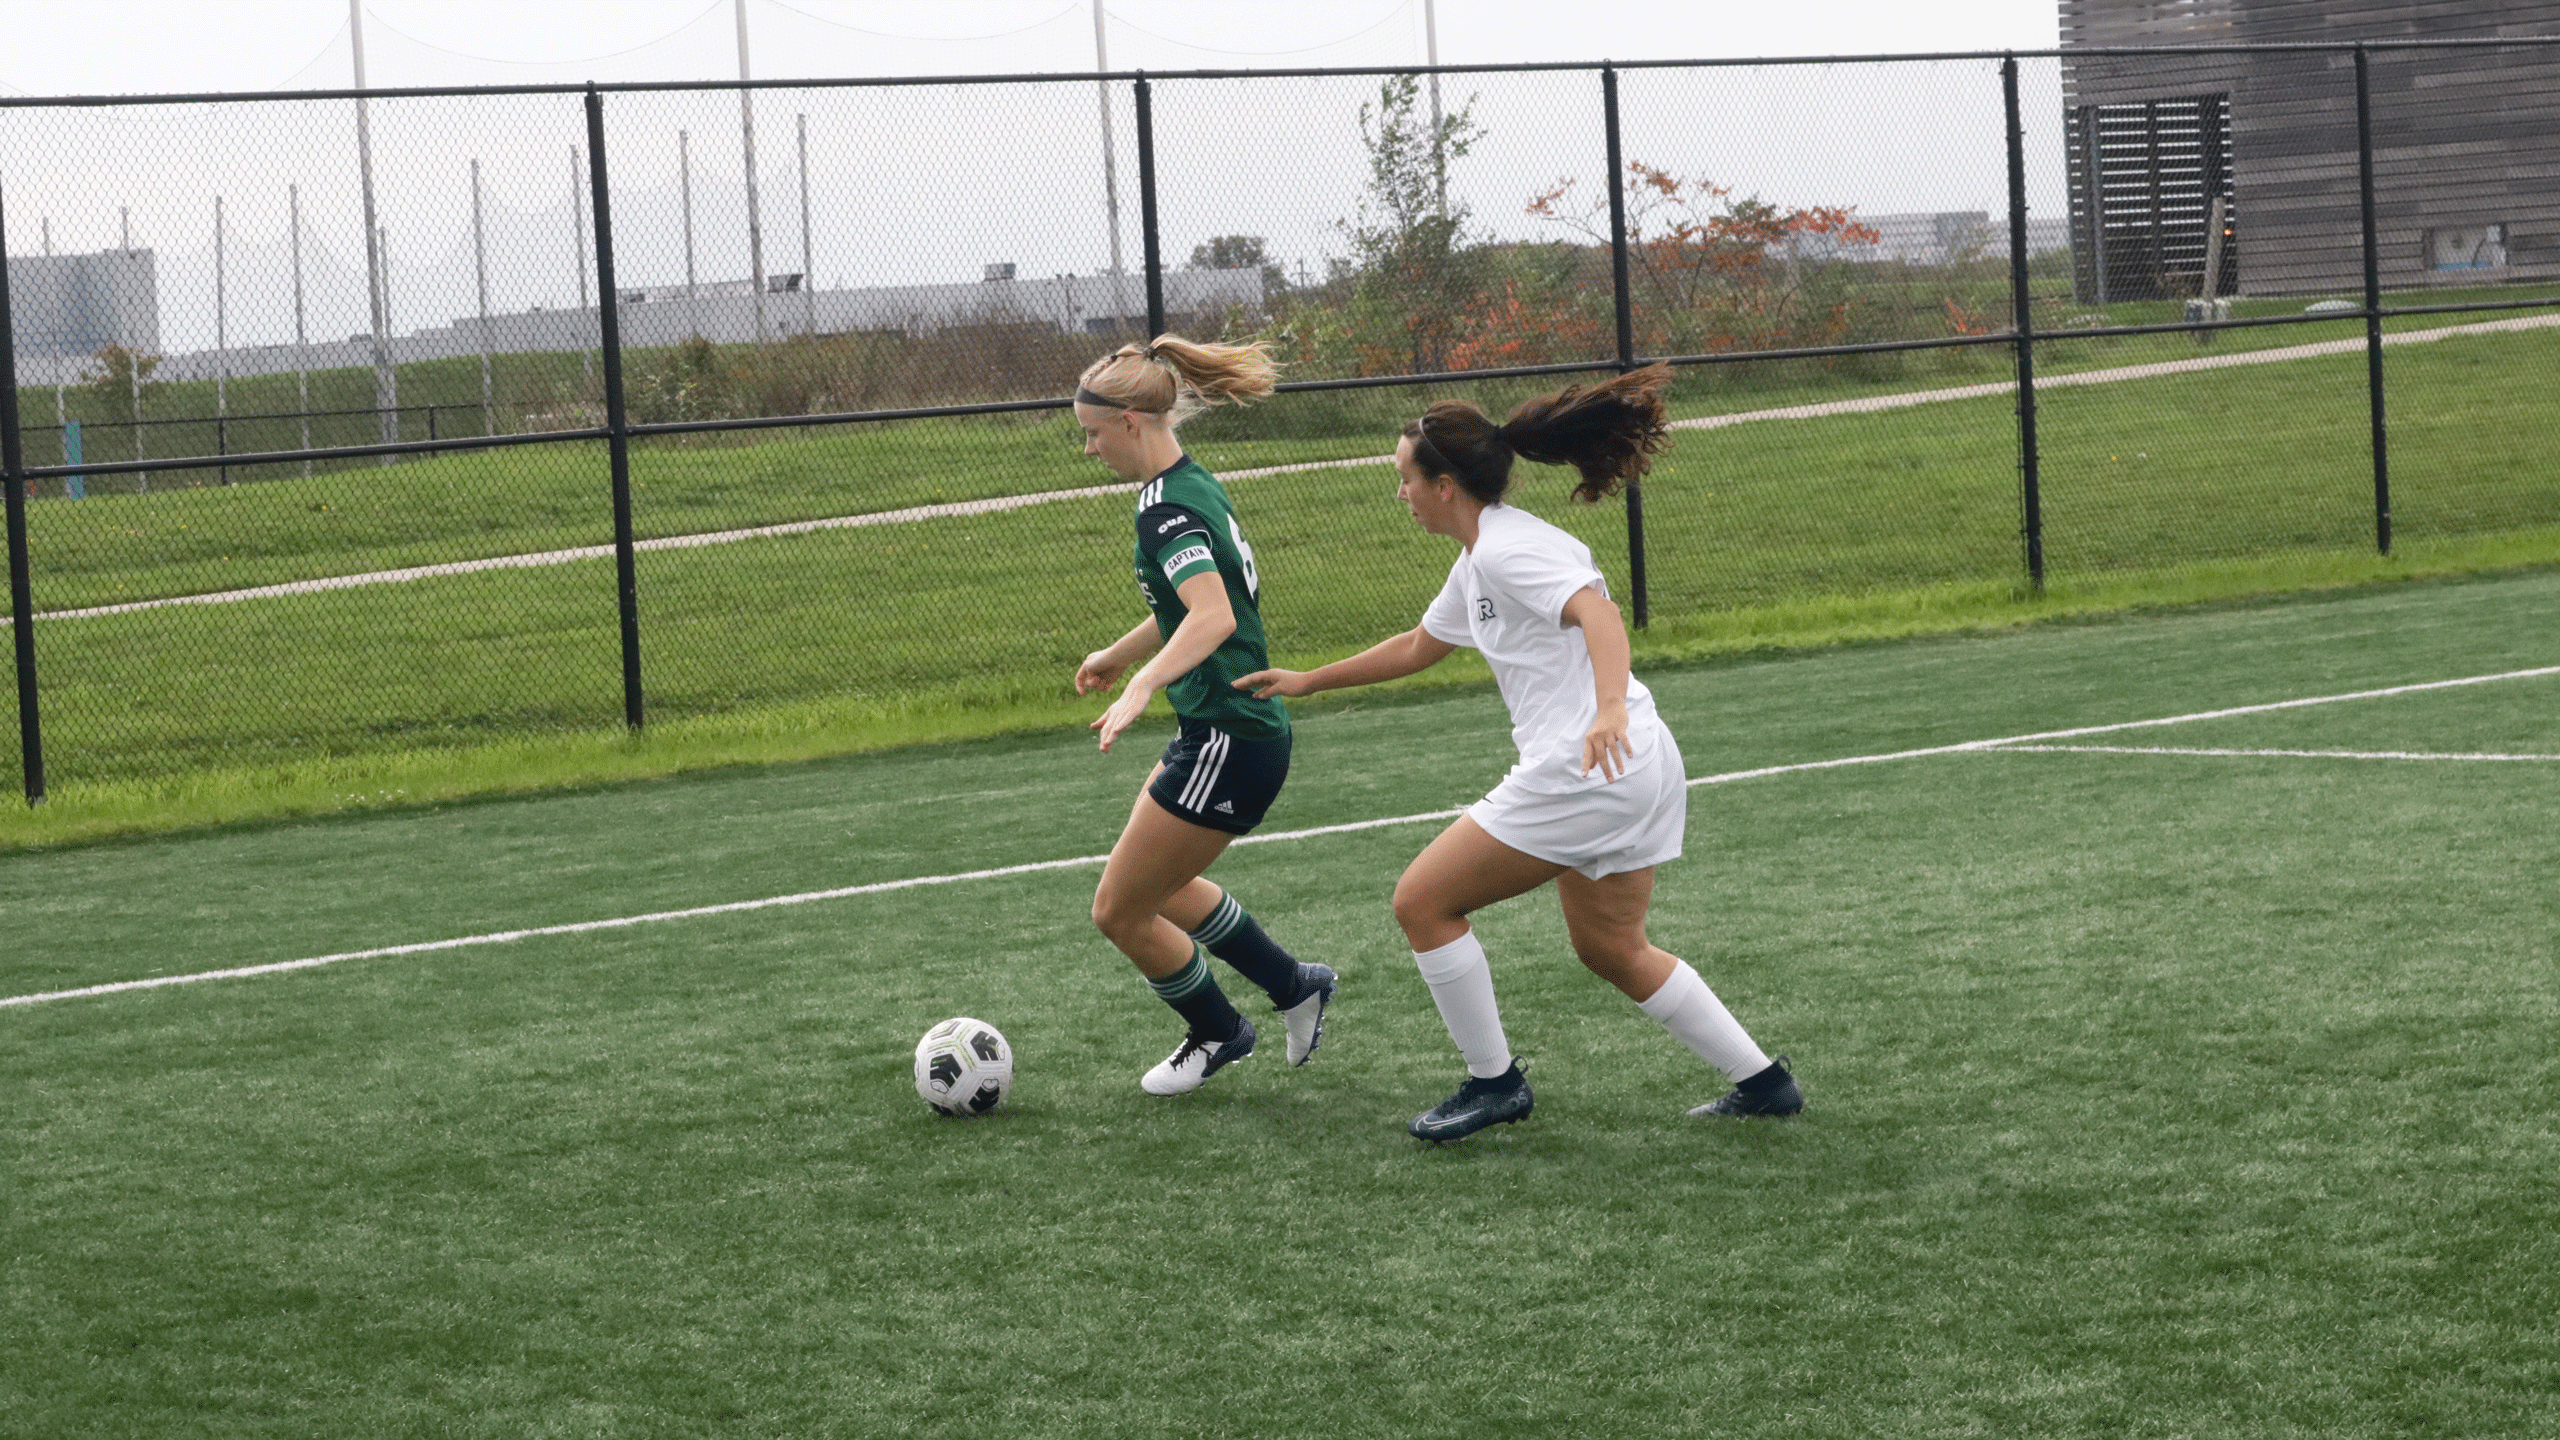 A soccer player with a white jersey fights for the ball with a soccer player in a green jersey